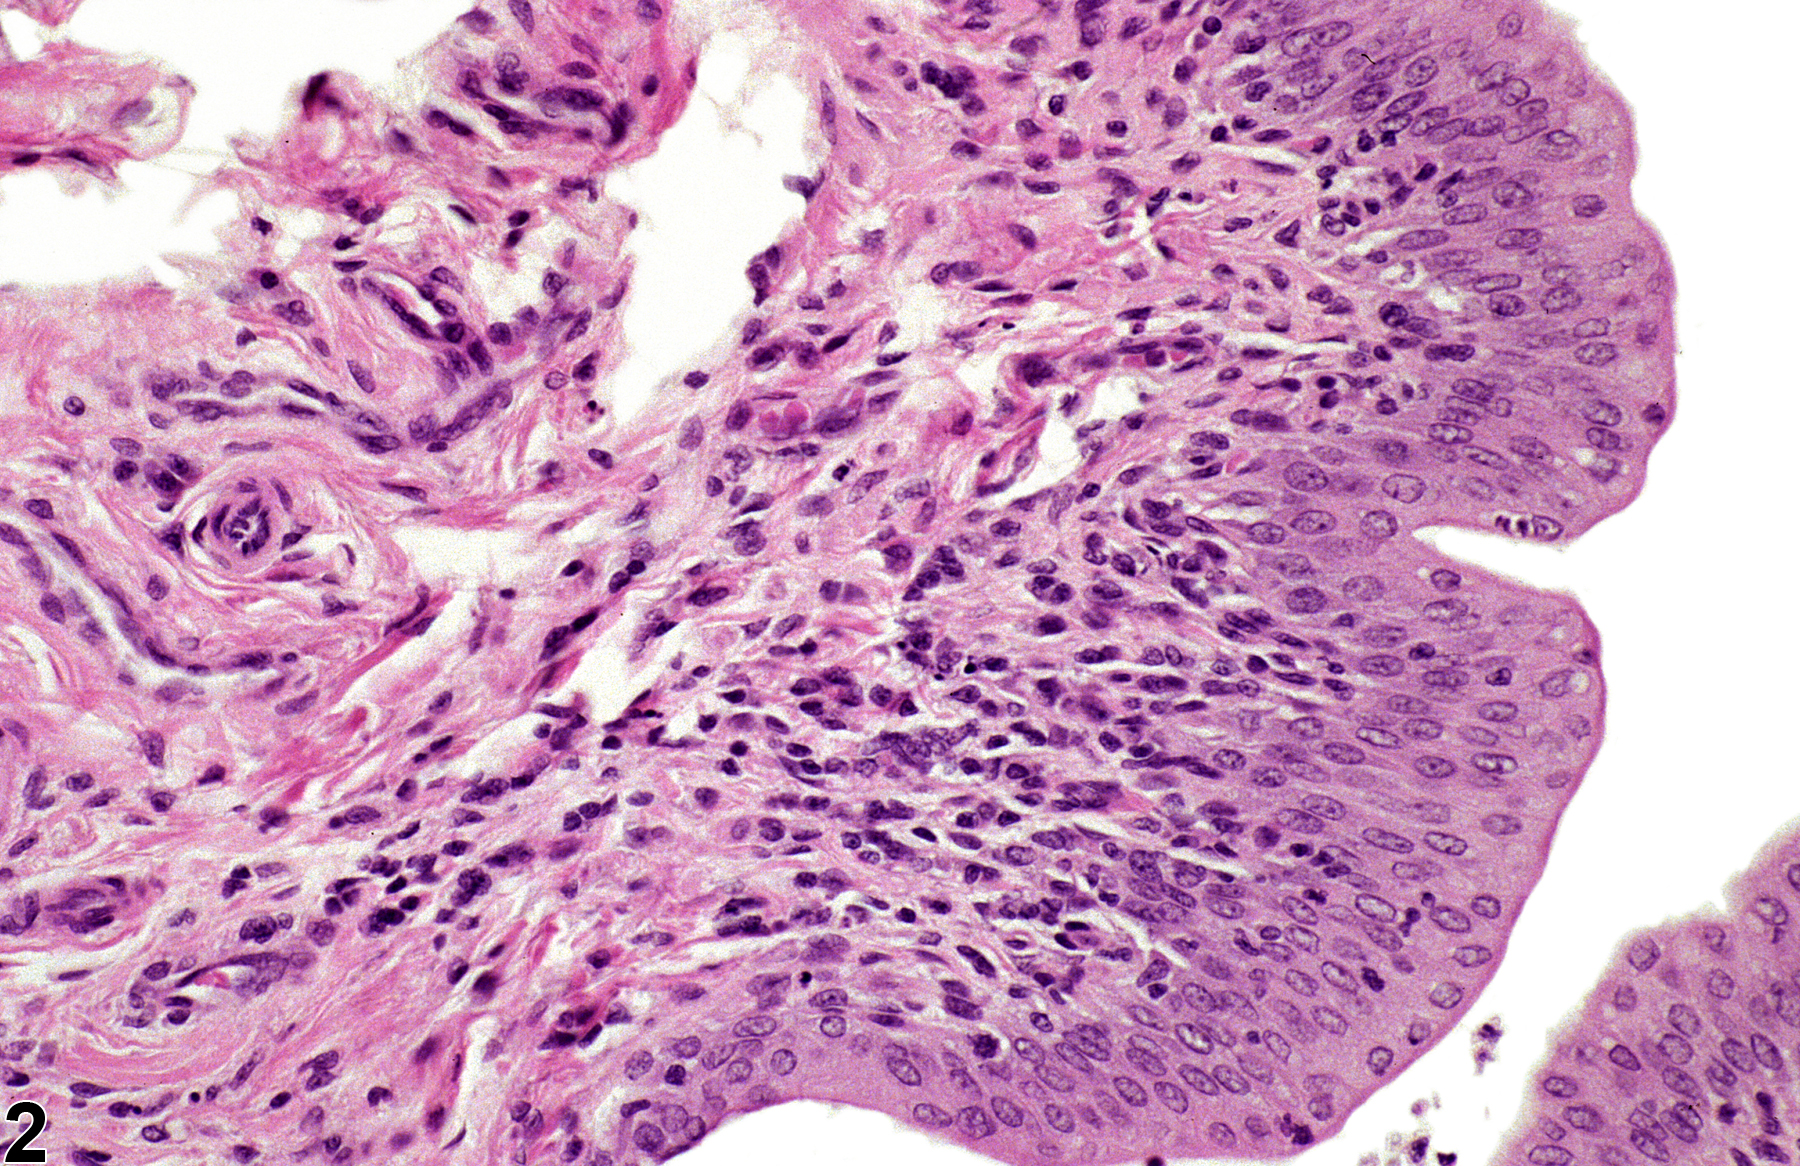 Image of hyperplasia in the urinary bladder from a female Harlan Sprague-Dawley rat in a chronic study